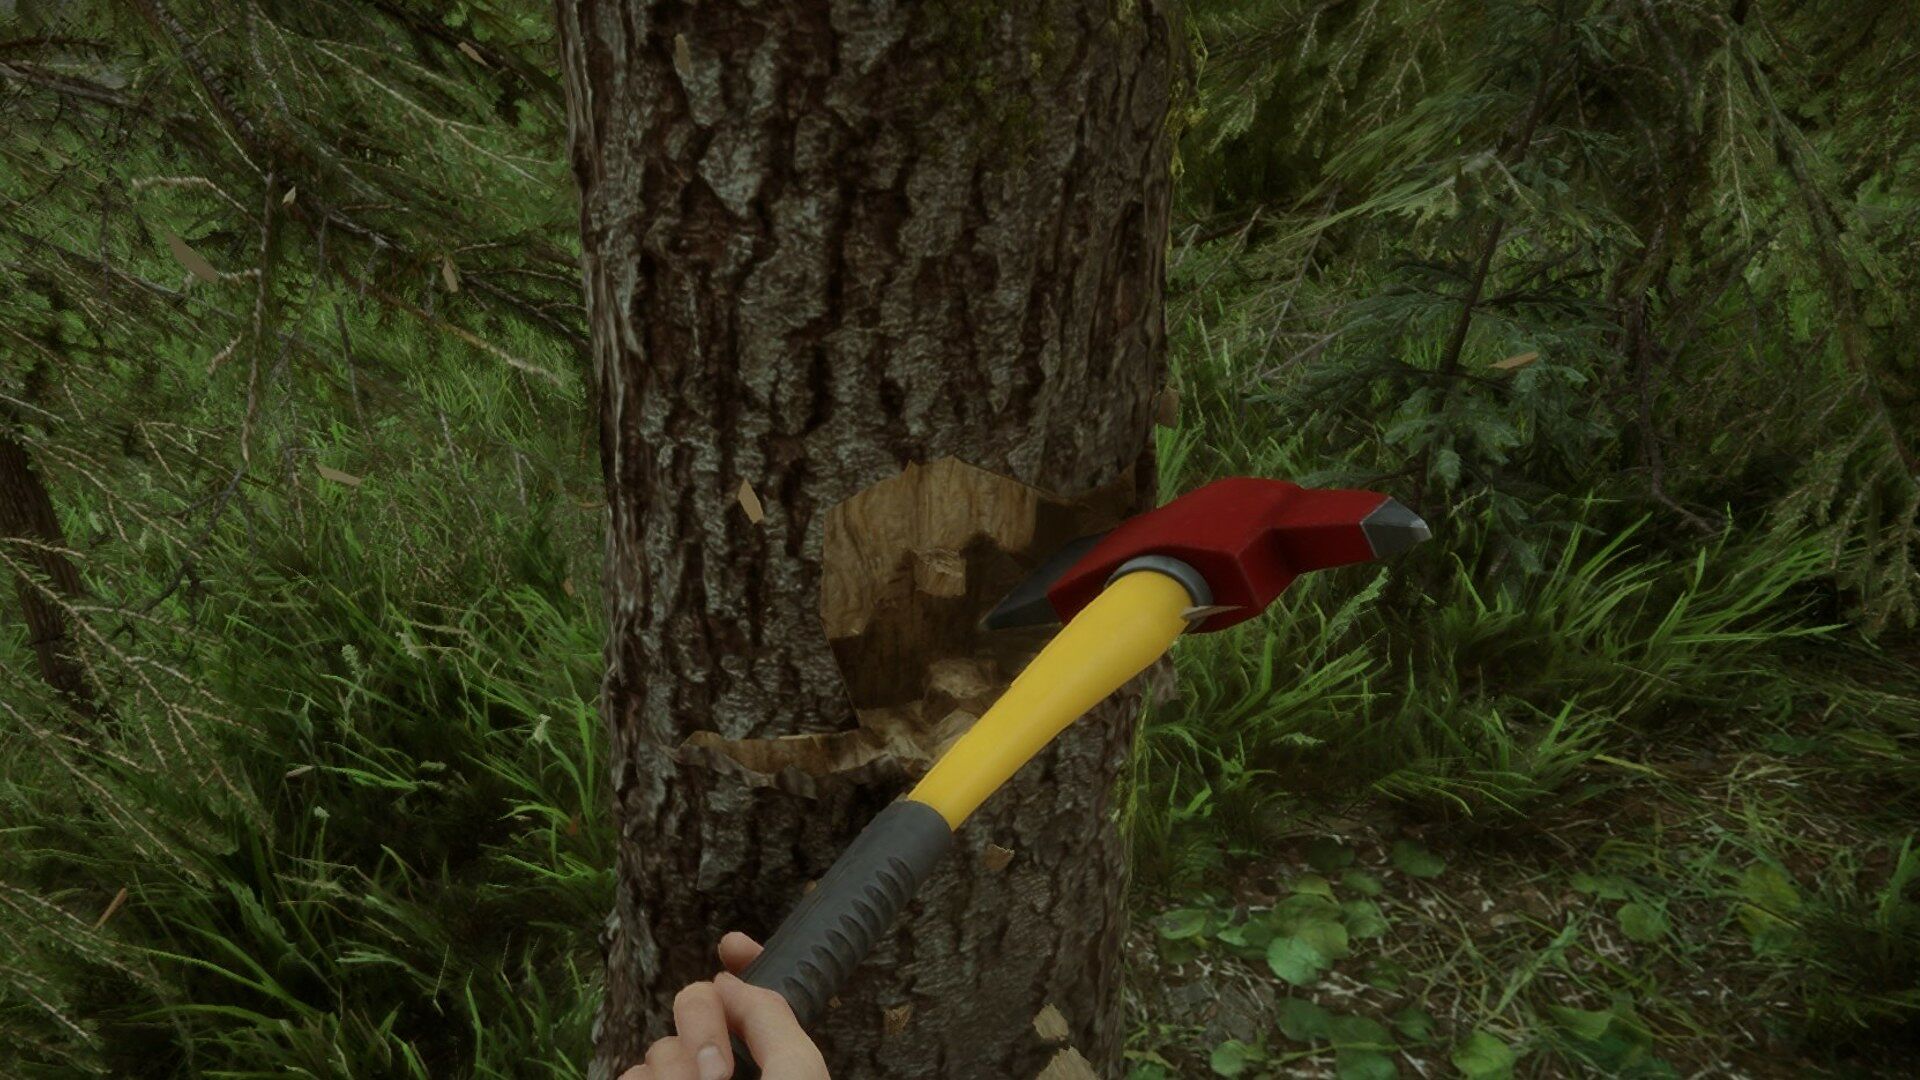 The player uses the firefighter axe in Sons of the Forest to chop down a tree.